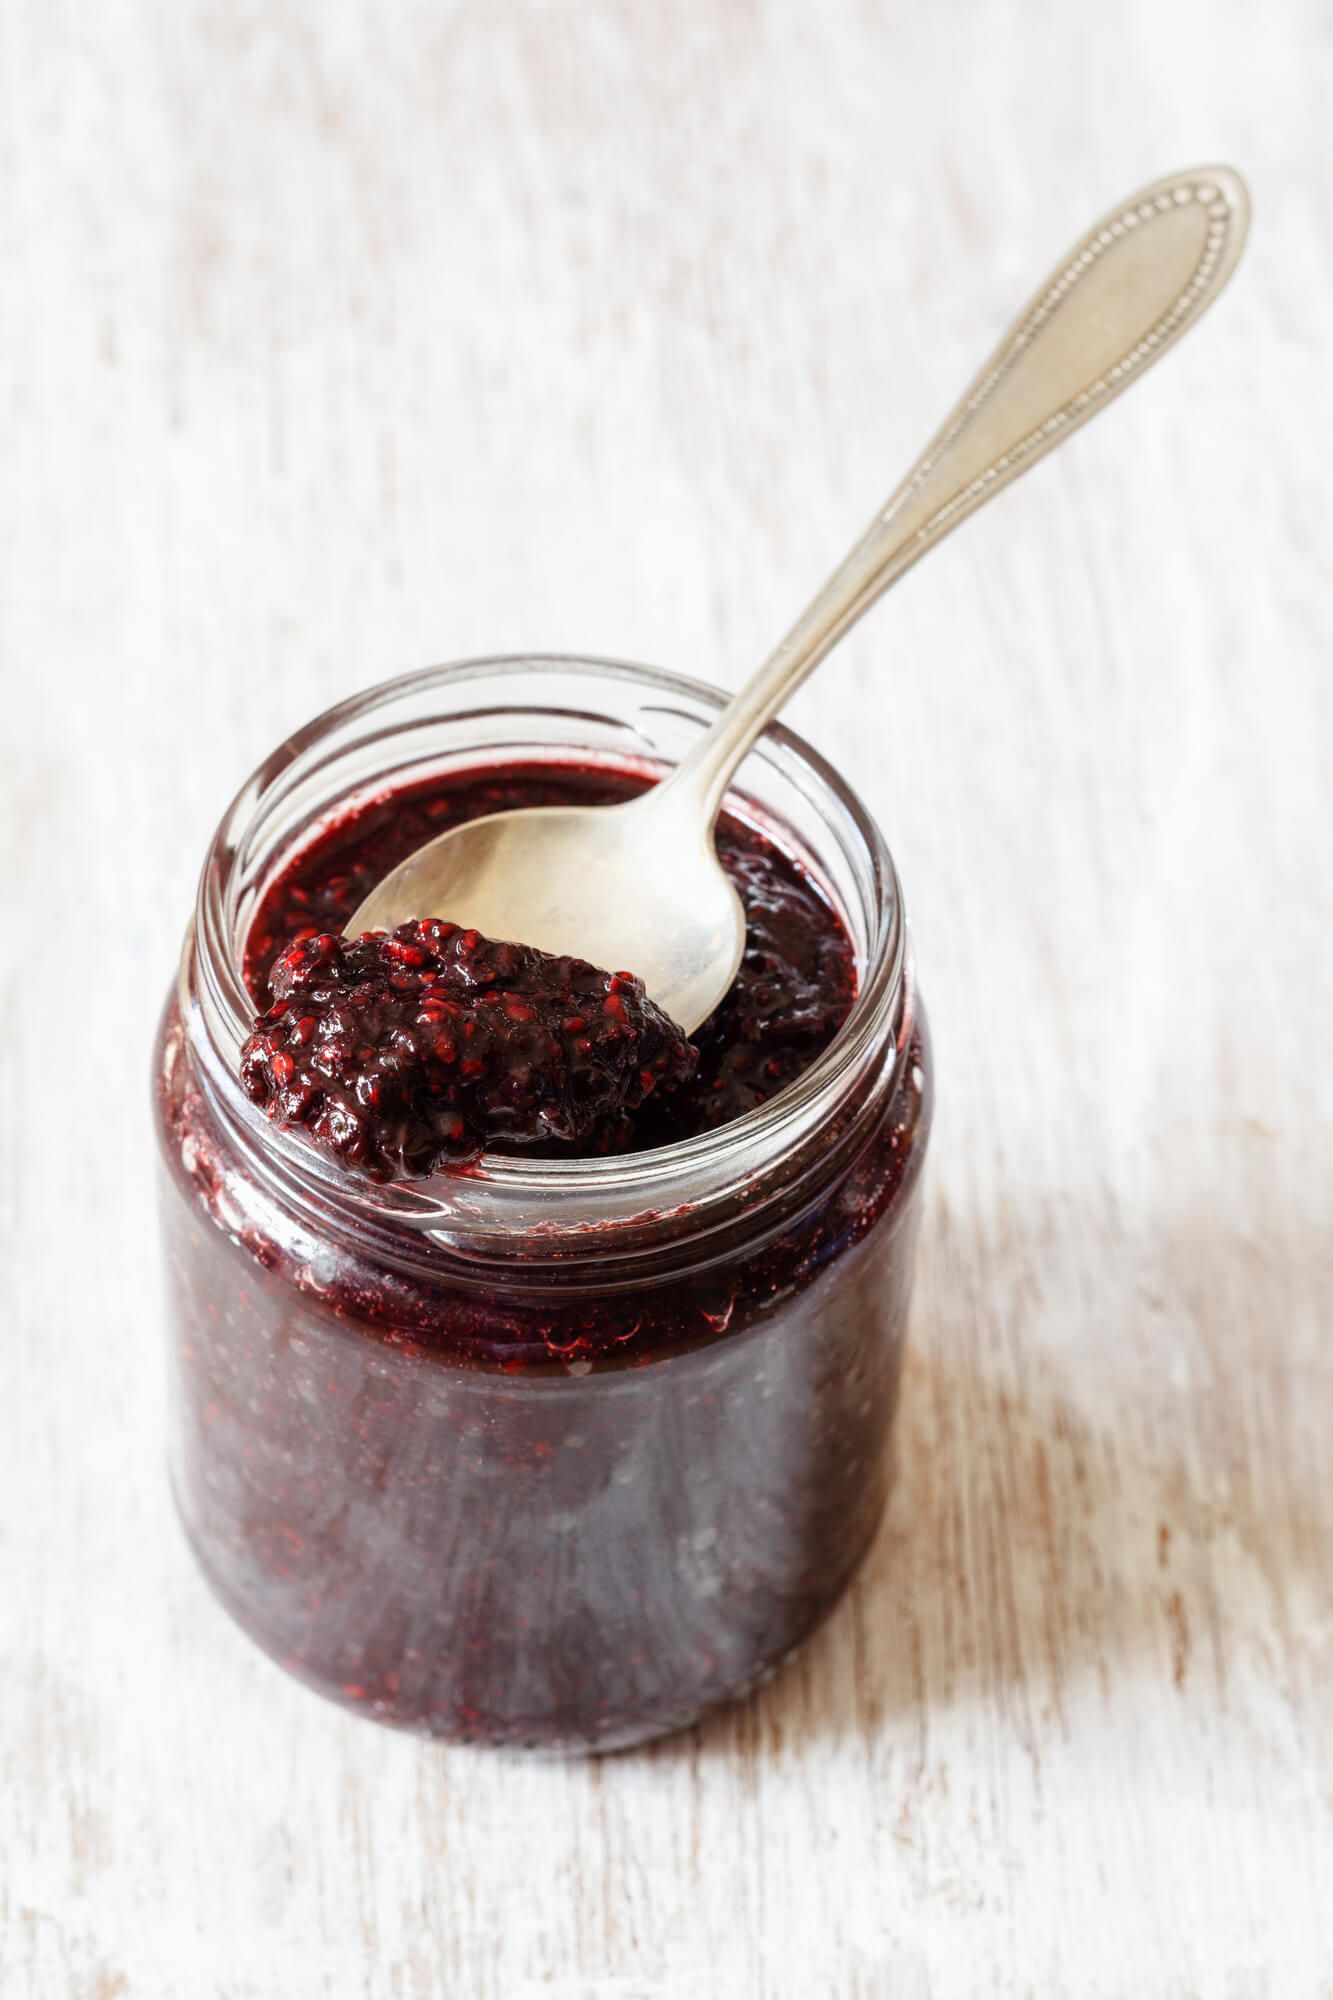 Berry chia seed jam in a glass jar with a spoon and blackberry.